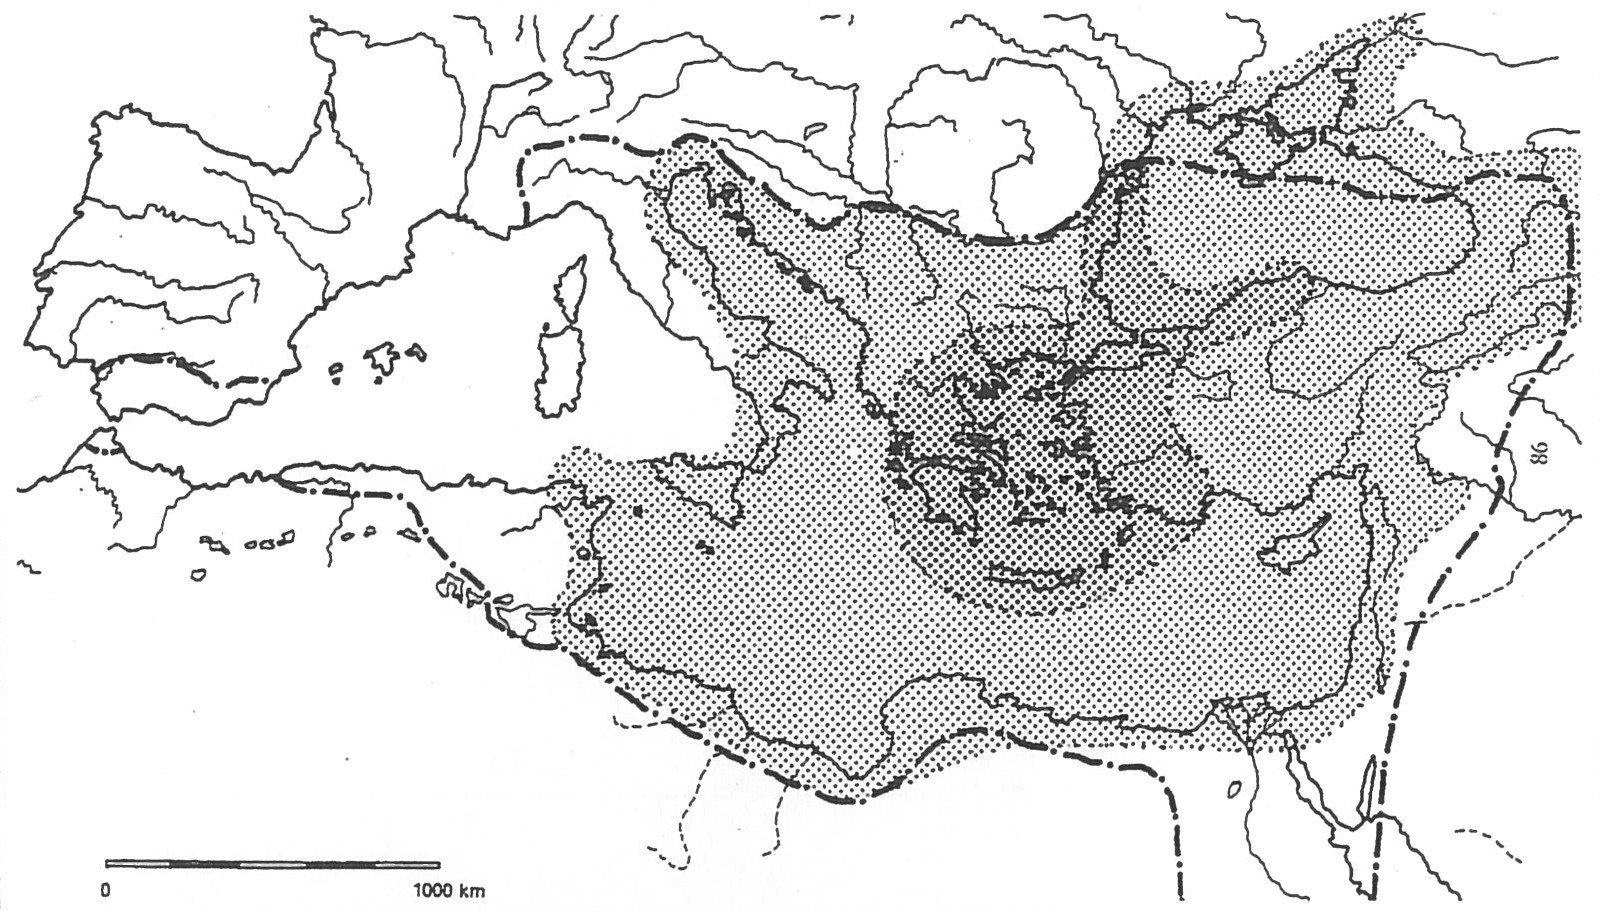 The Core Areas of the Byzantine Empire according to Johannes Koder